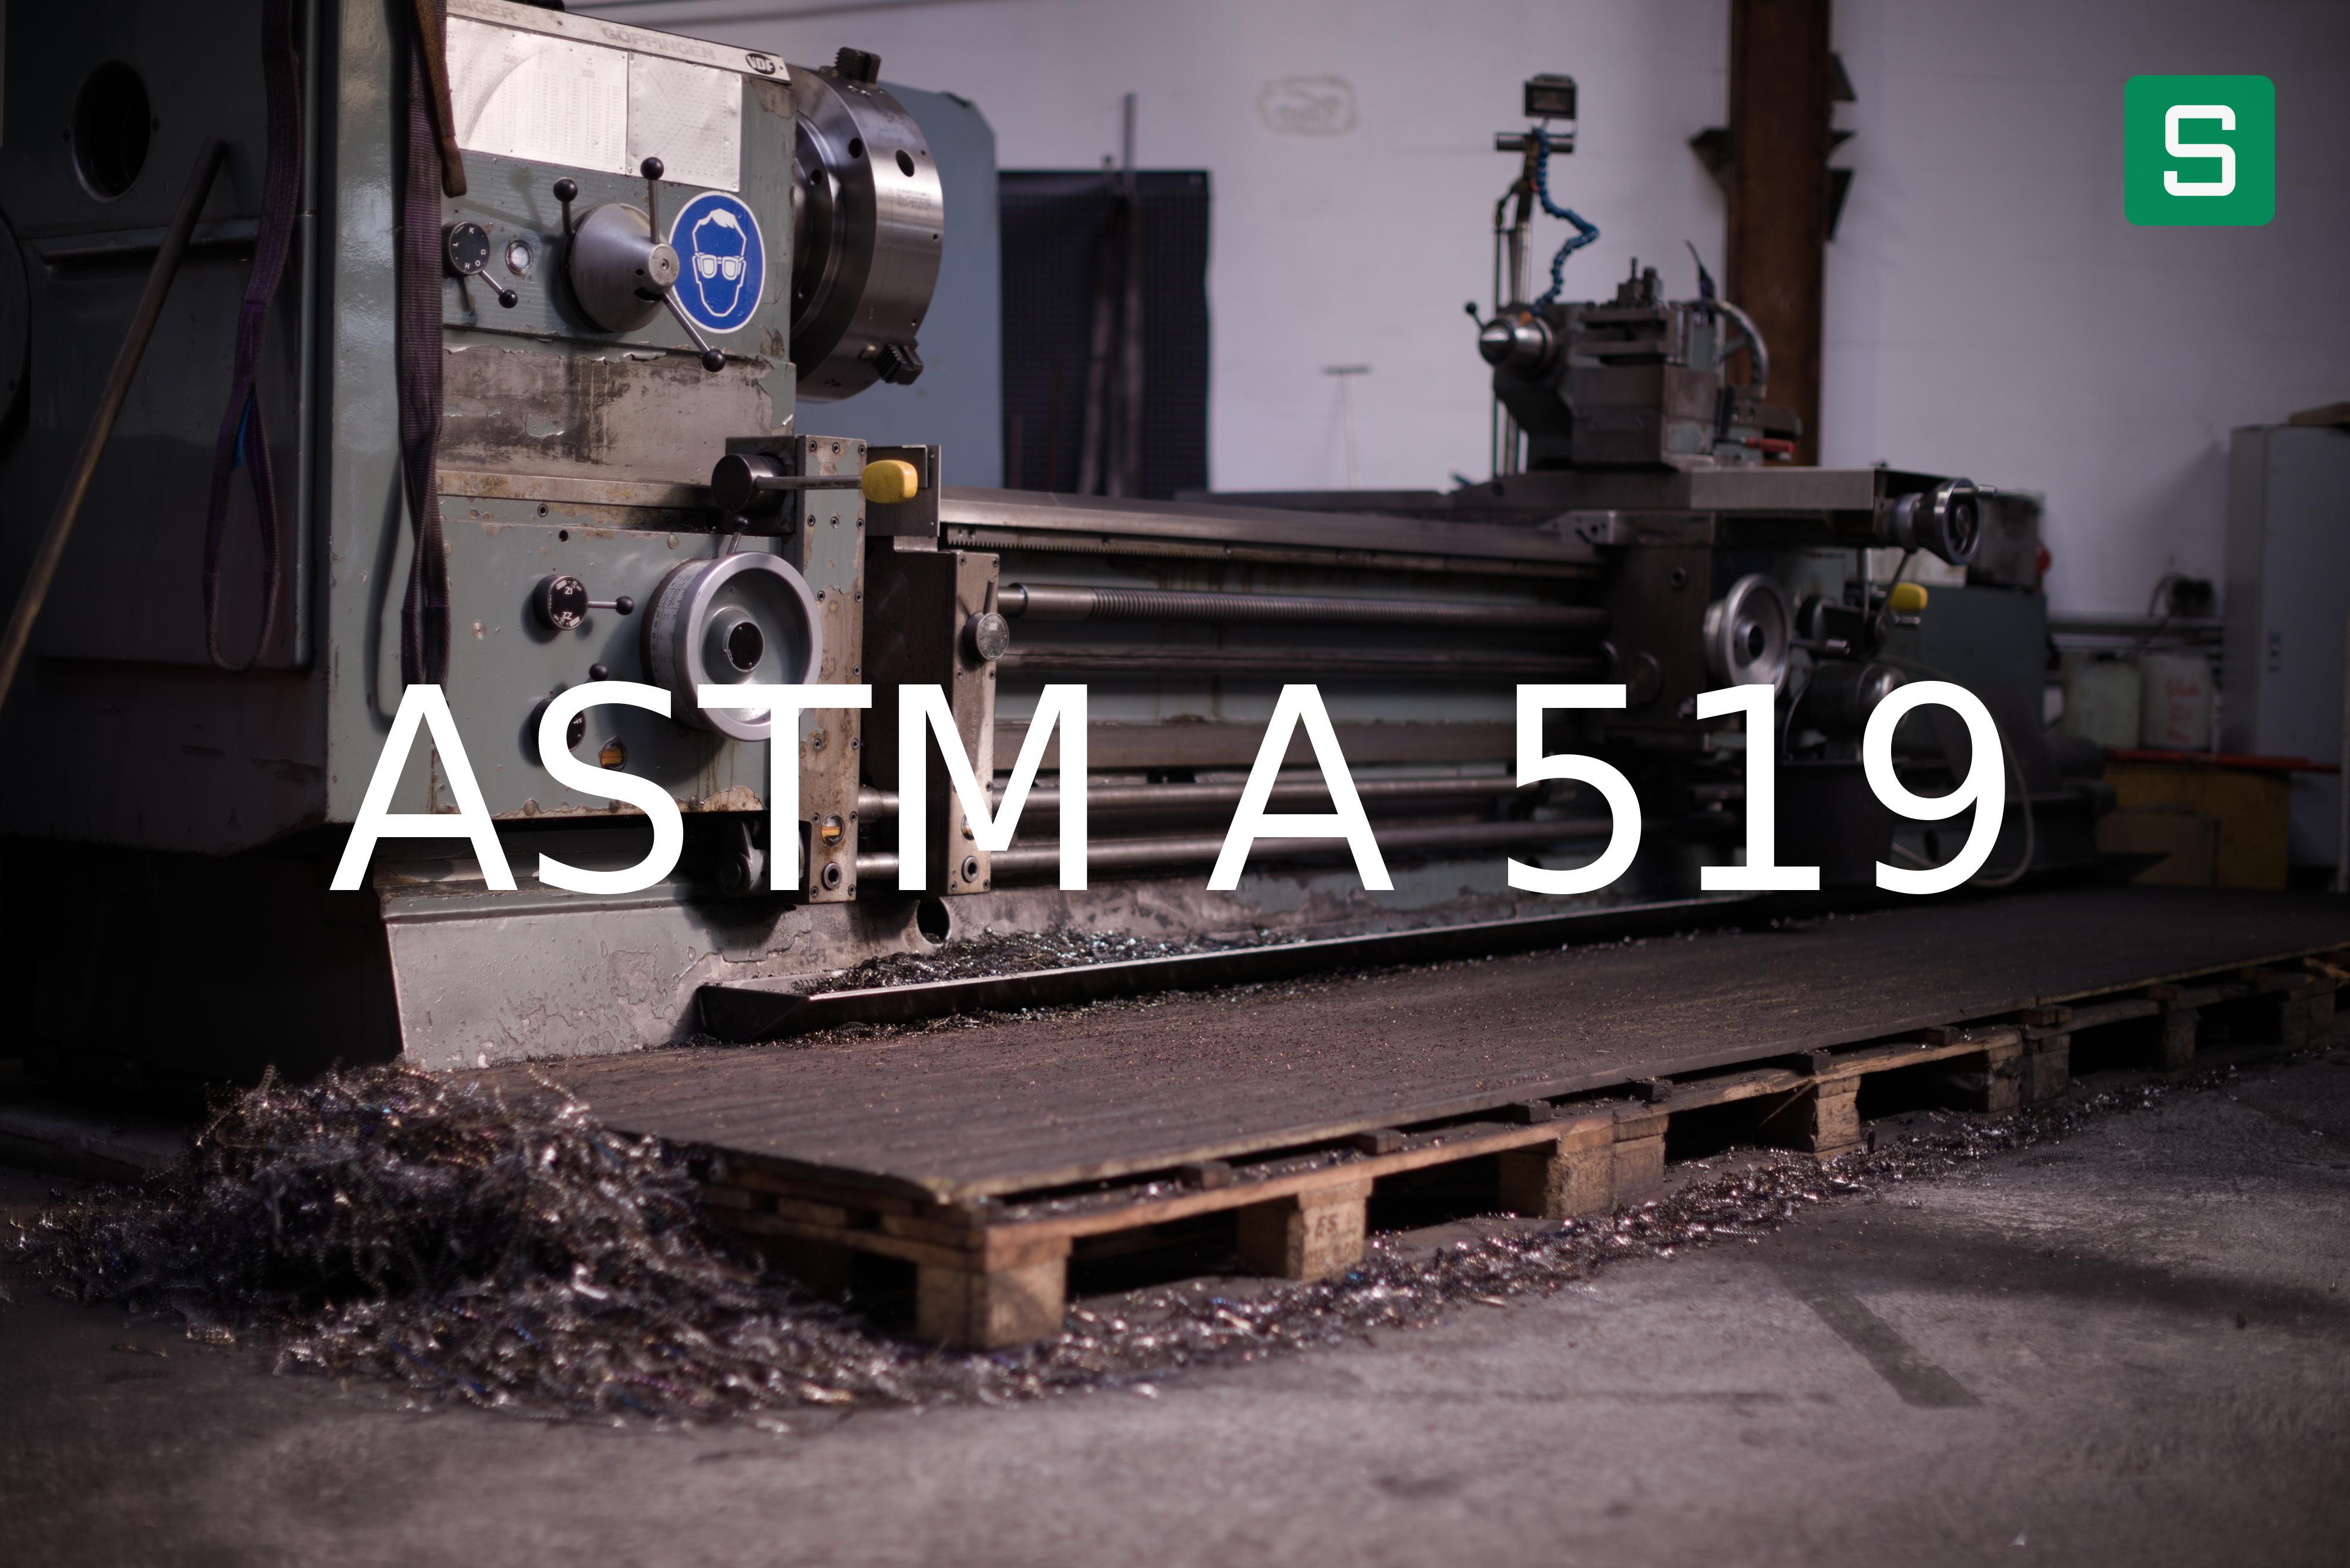 Steel Material: ASTM A 519